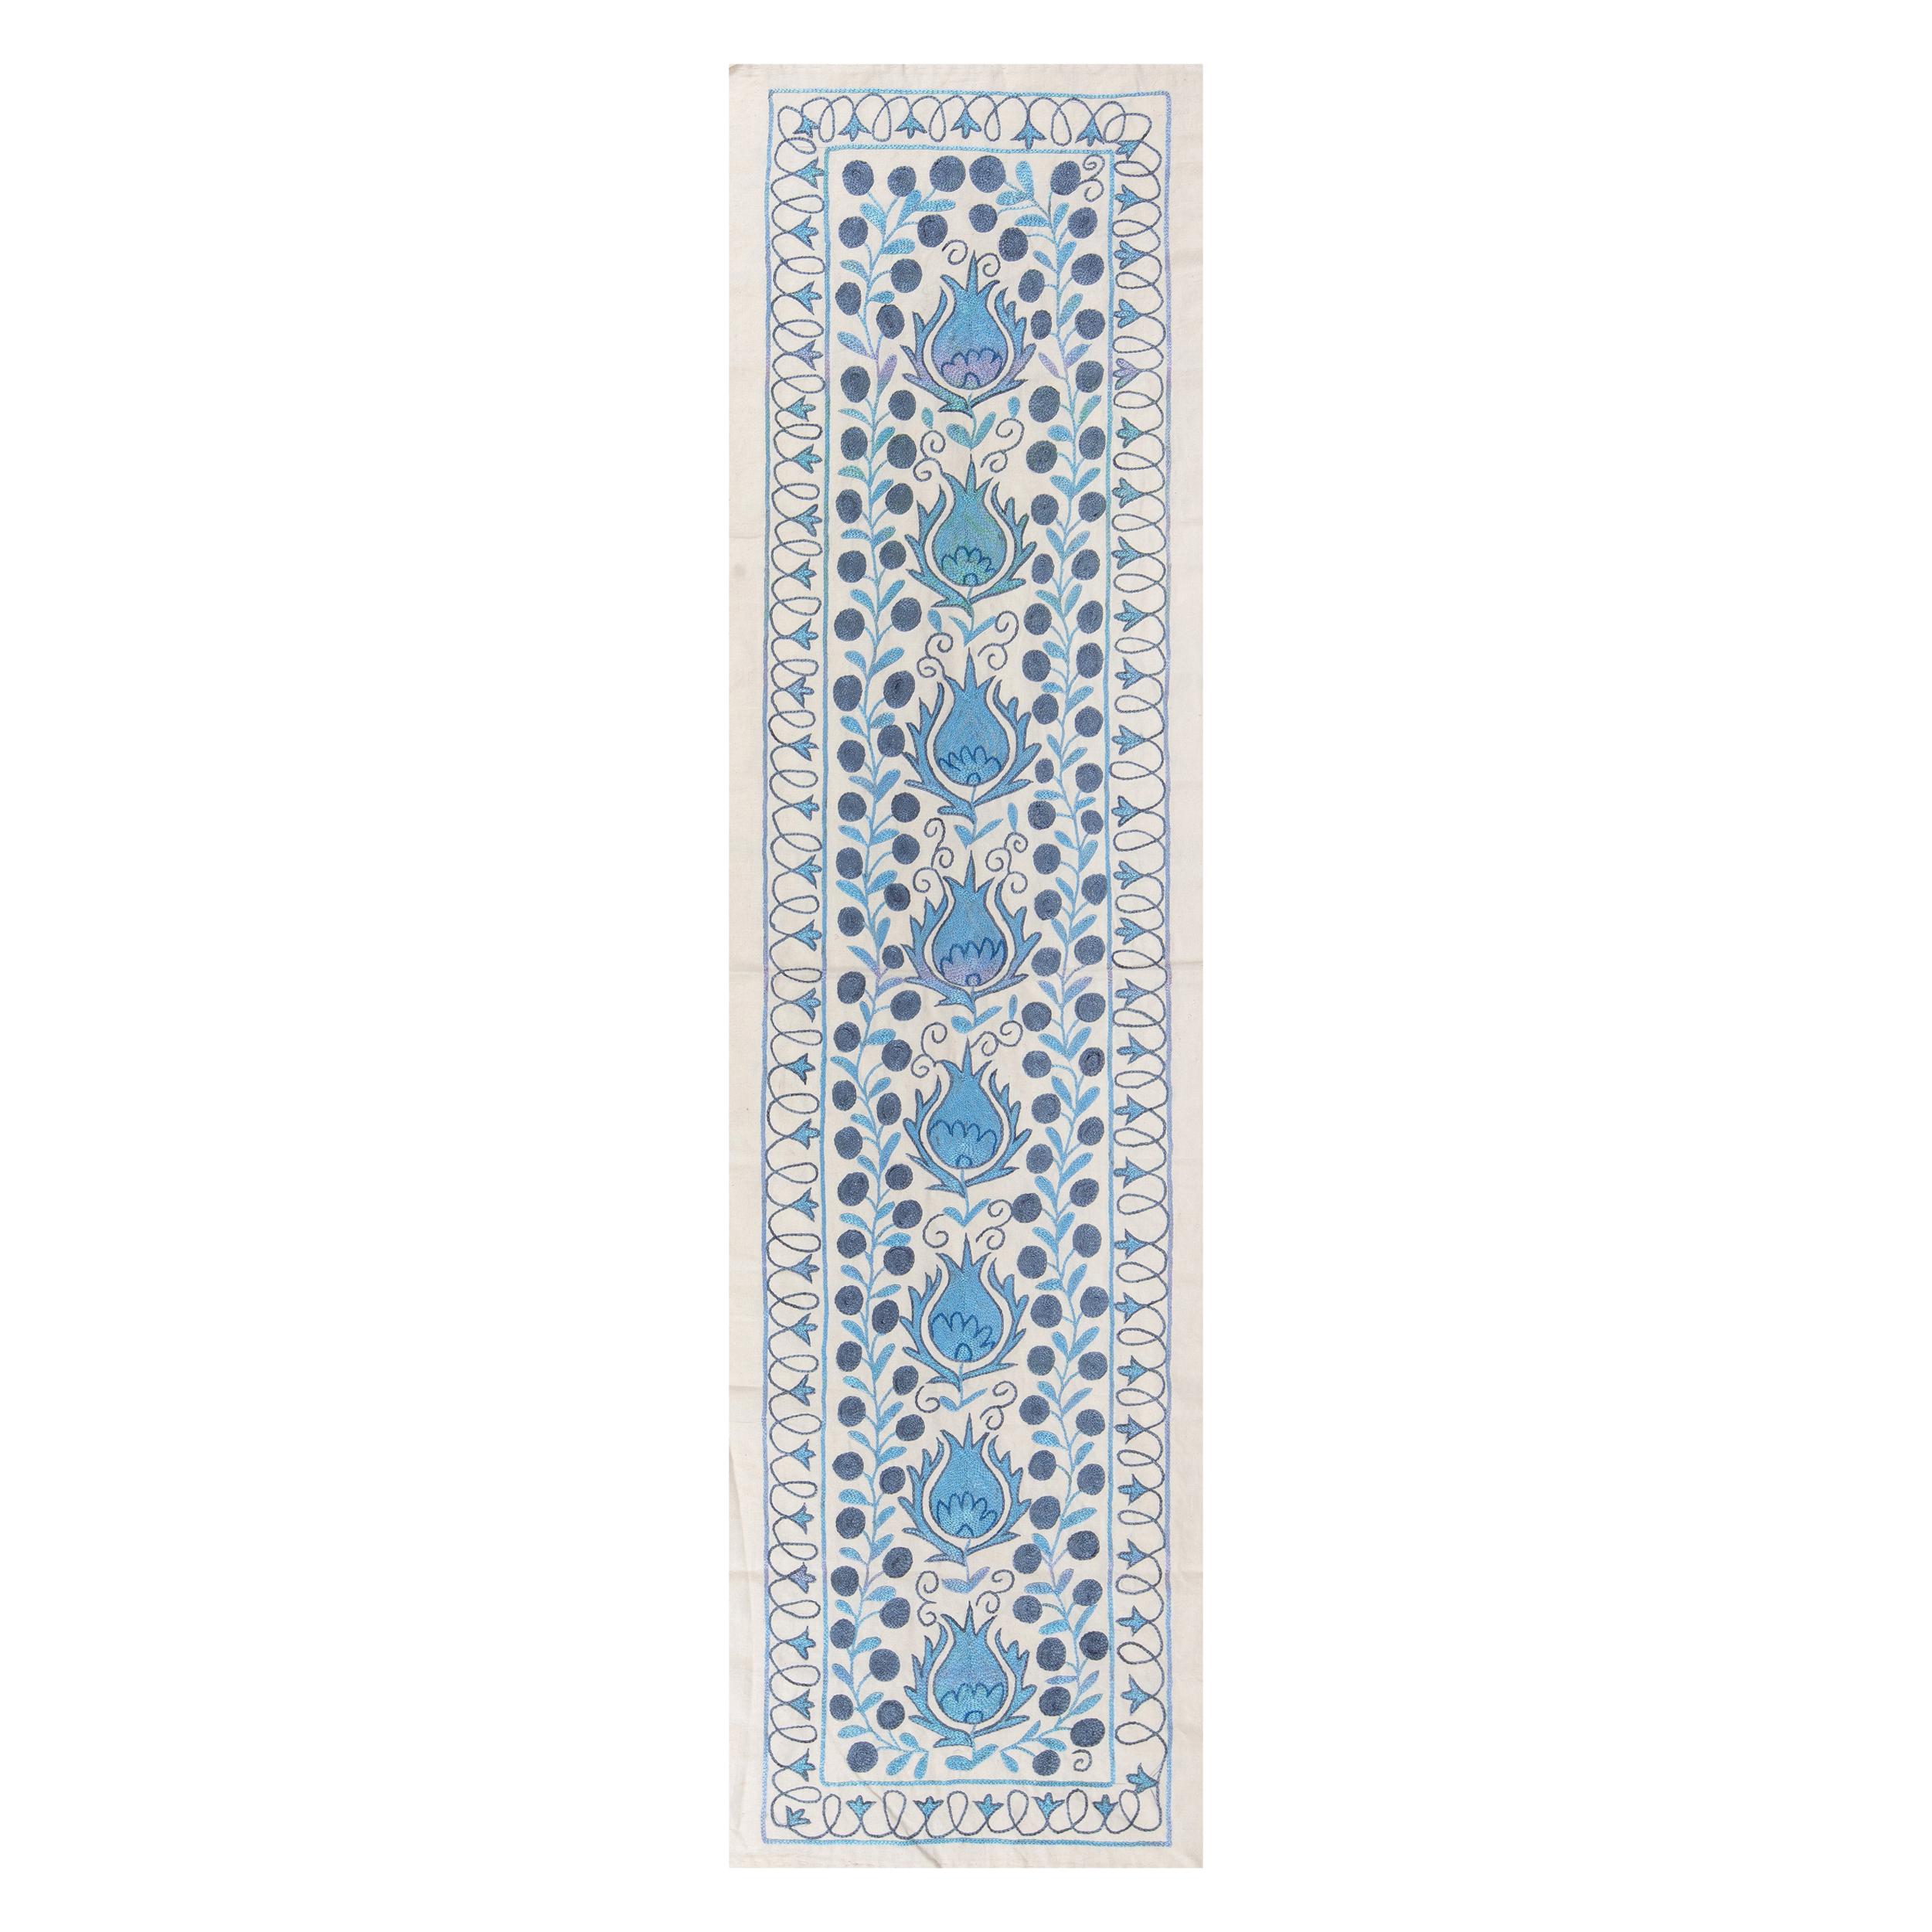 1.7x6.2 Ft Central Asian Suzani Textile. Embroidered Cotton & Silk Table Runner For Sale